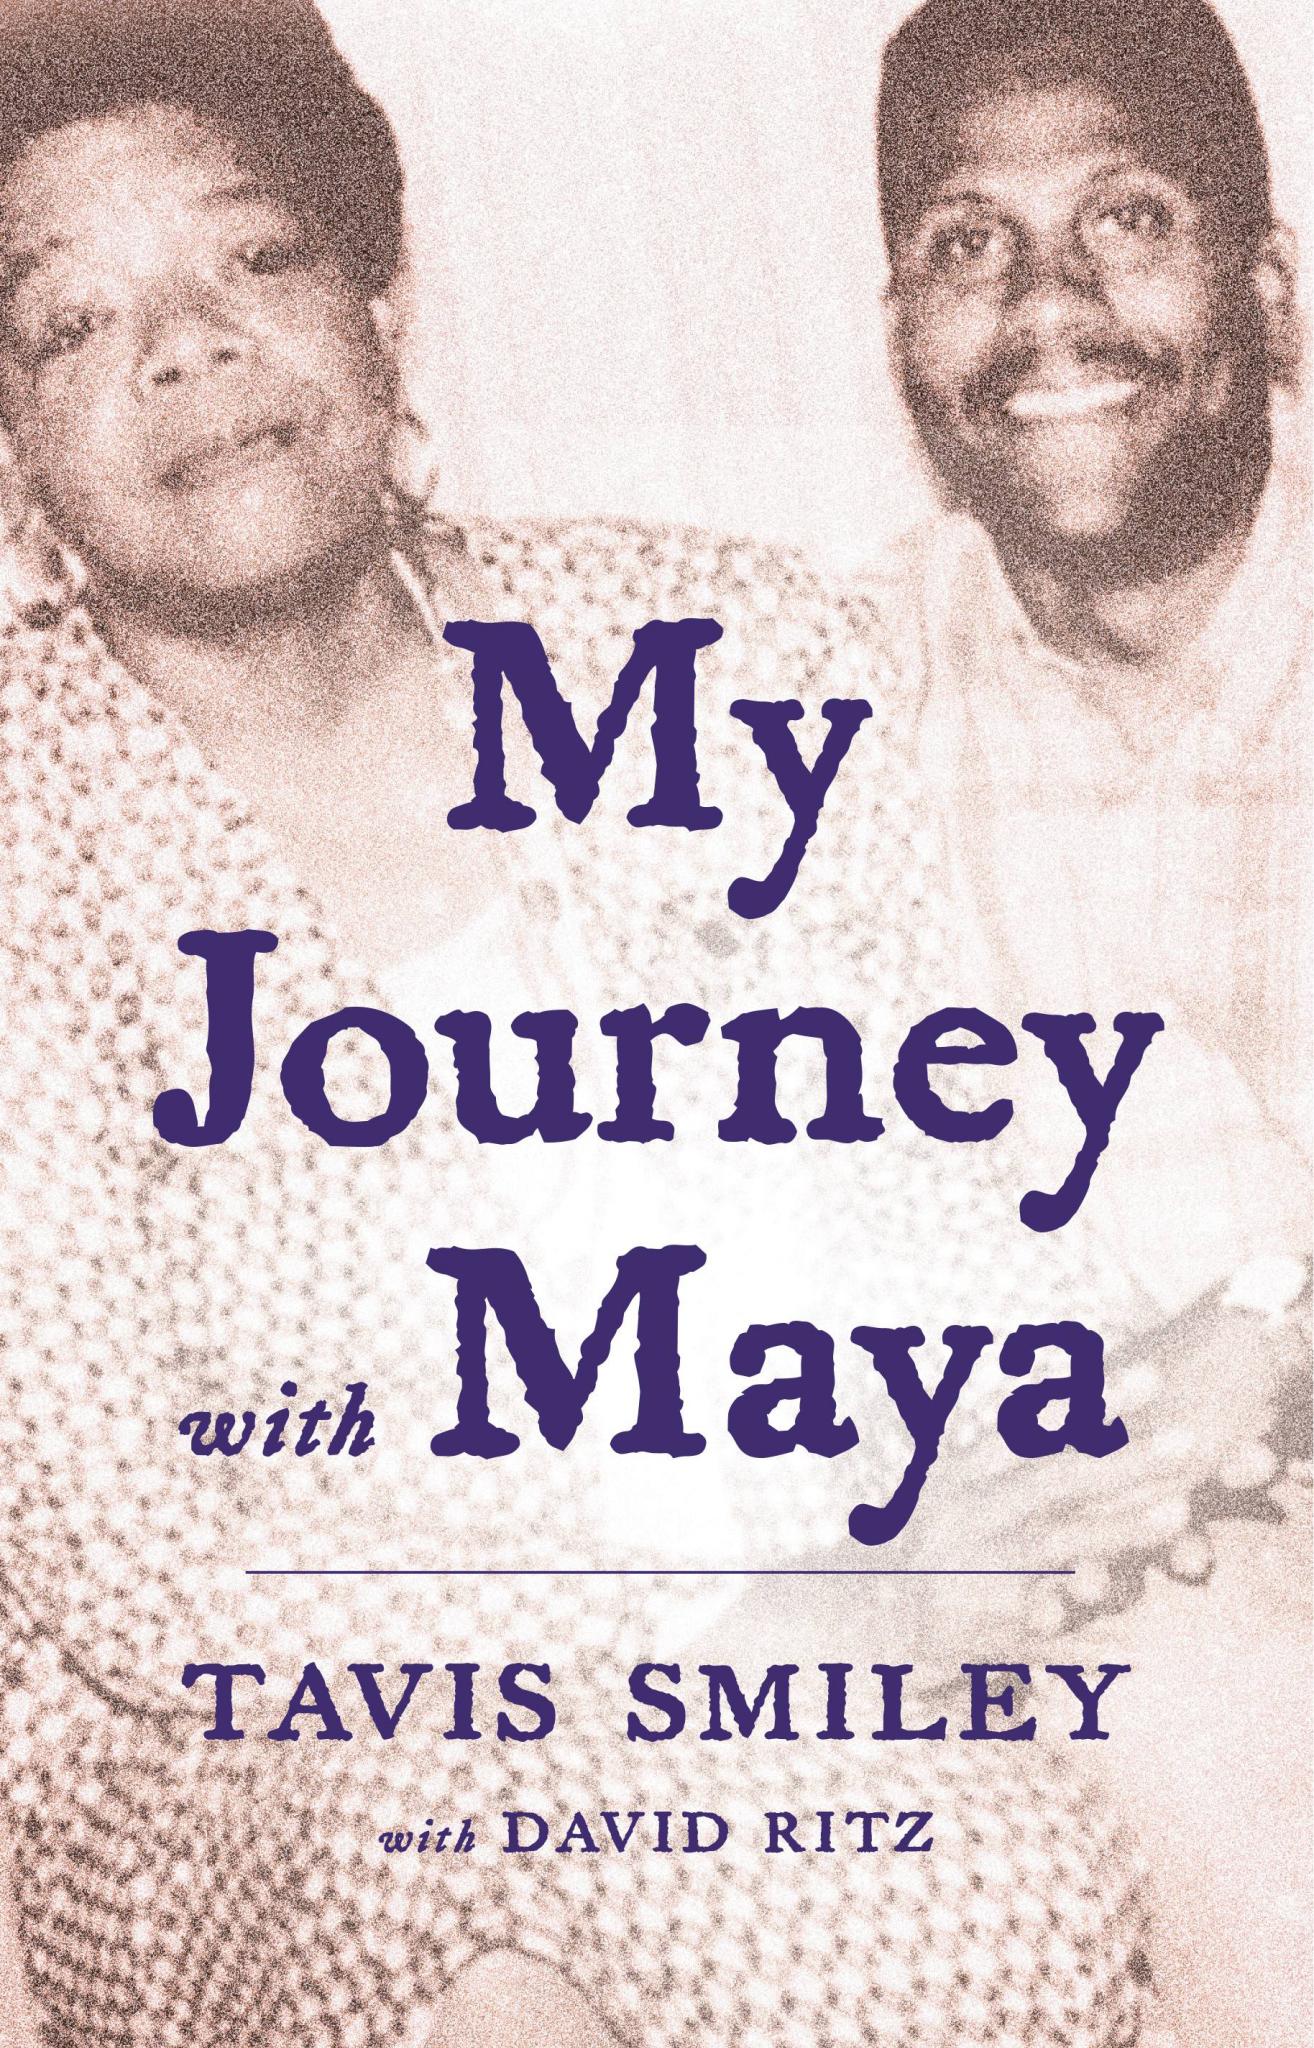 Read An Excerpt from Tavis Smiley’s ‘My Journey with Maya’
